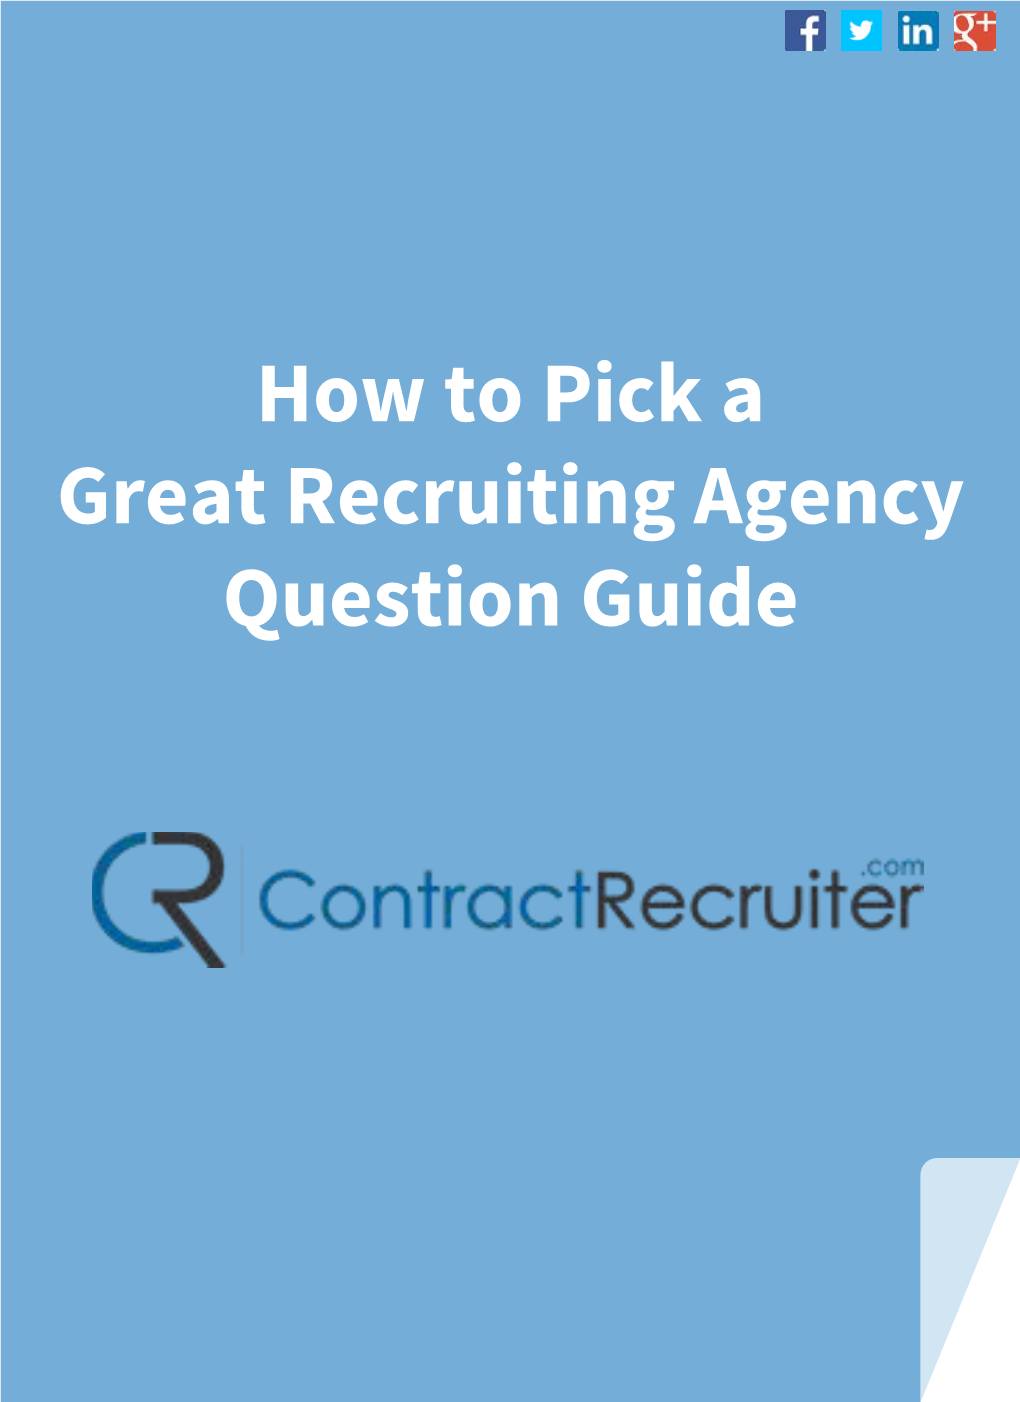 How to Pick a Great Recruiting Agency Question Guide Intro